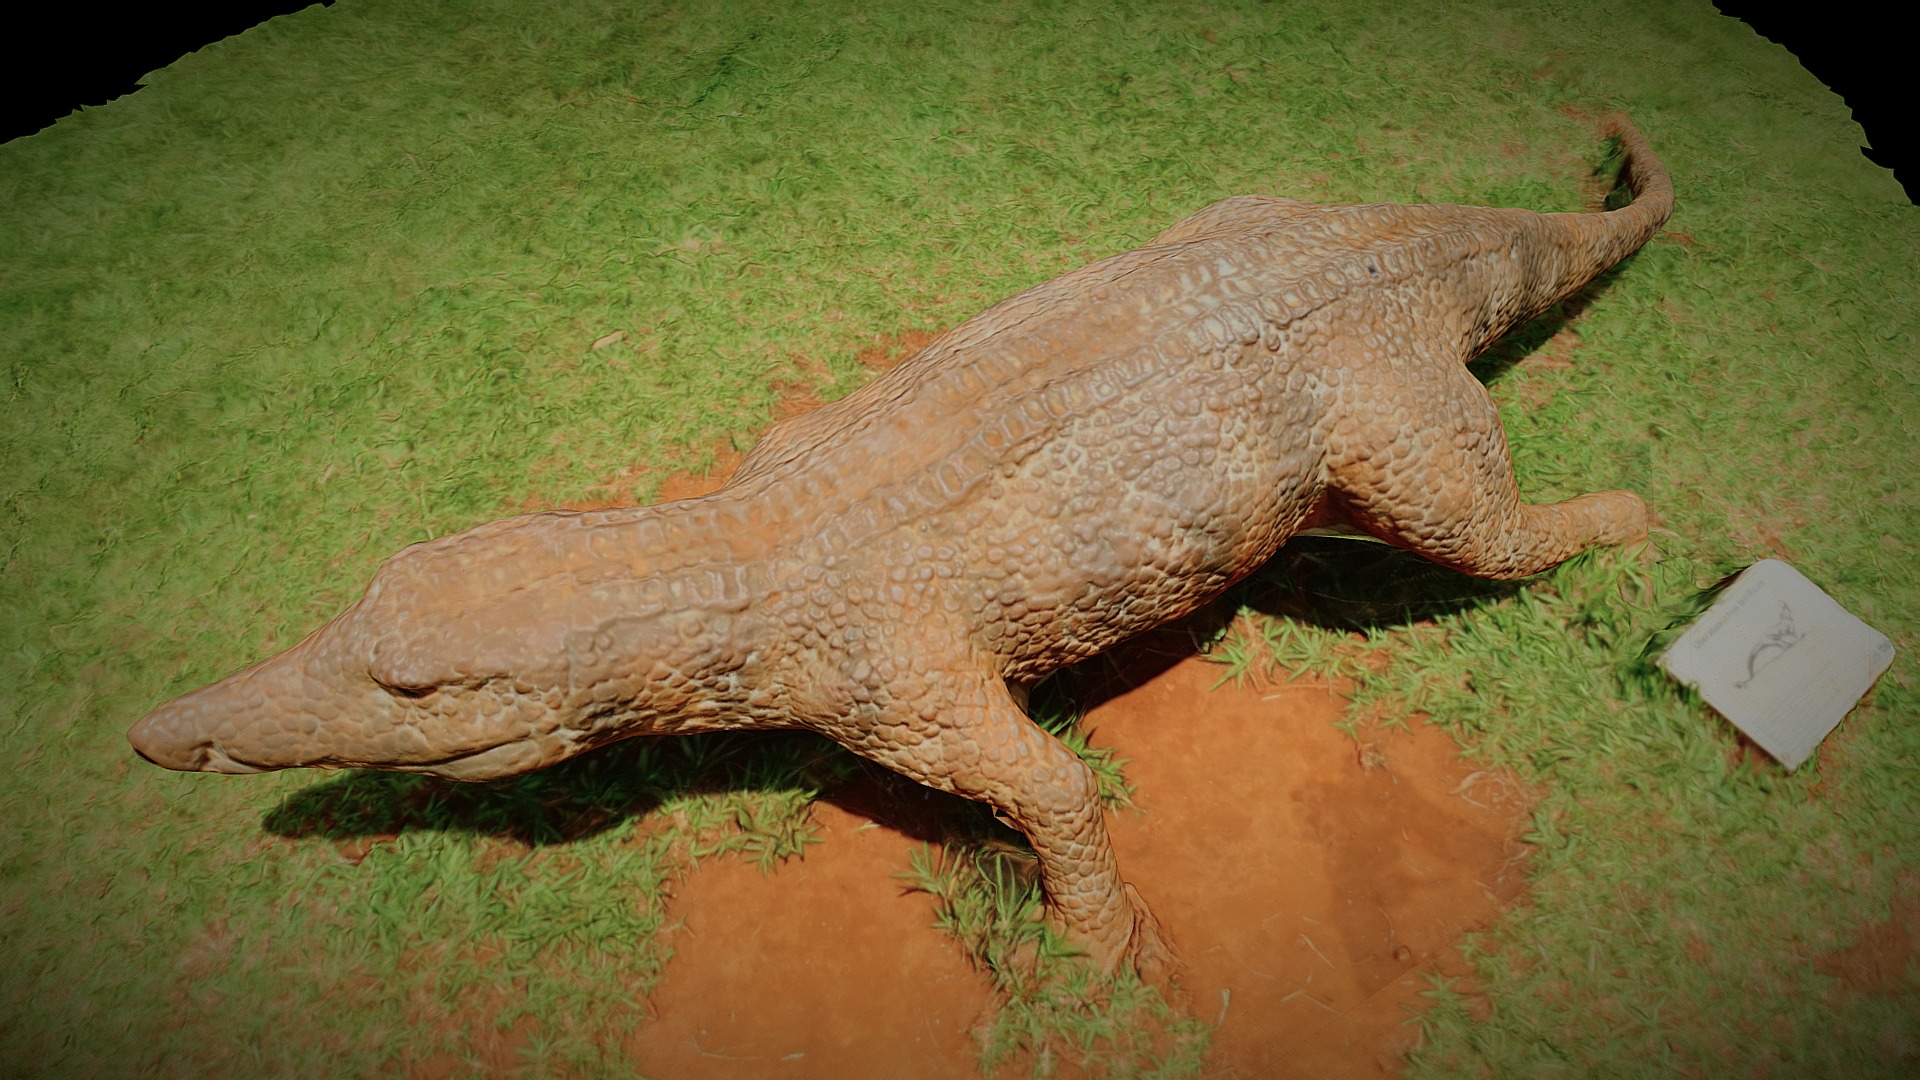 3D model Uberabasuchus terrificus - This is a 3D model of the Uberabasuchus terrificus. The 3D model is about a large alligator on grass.